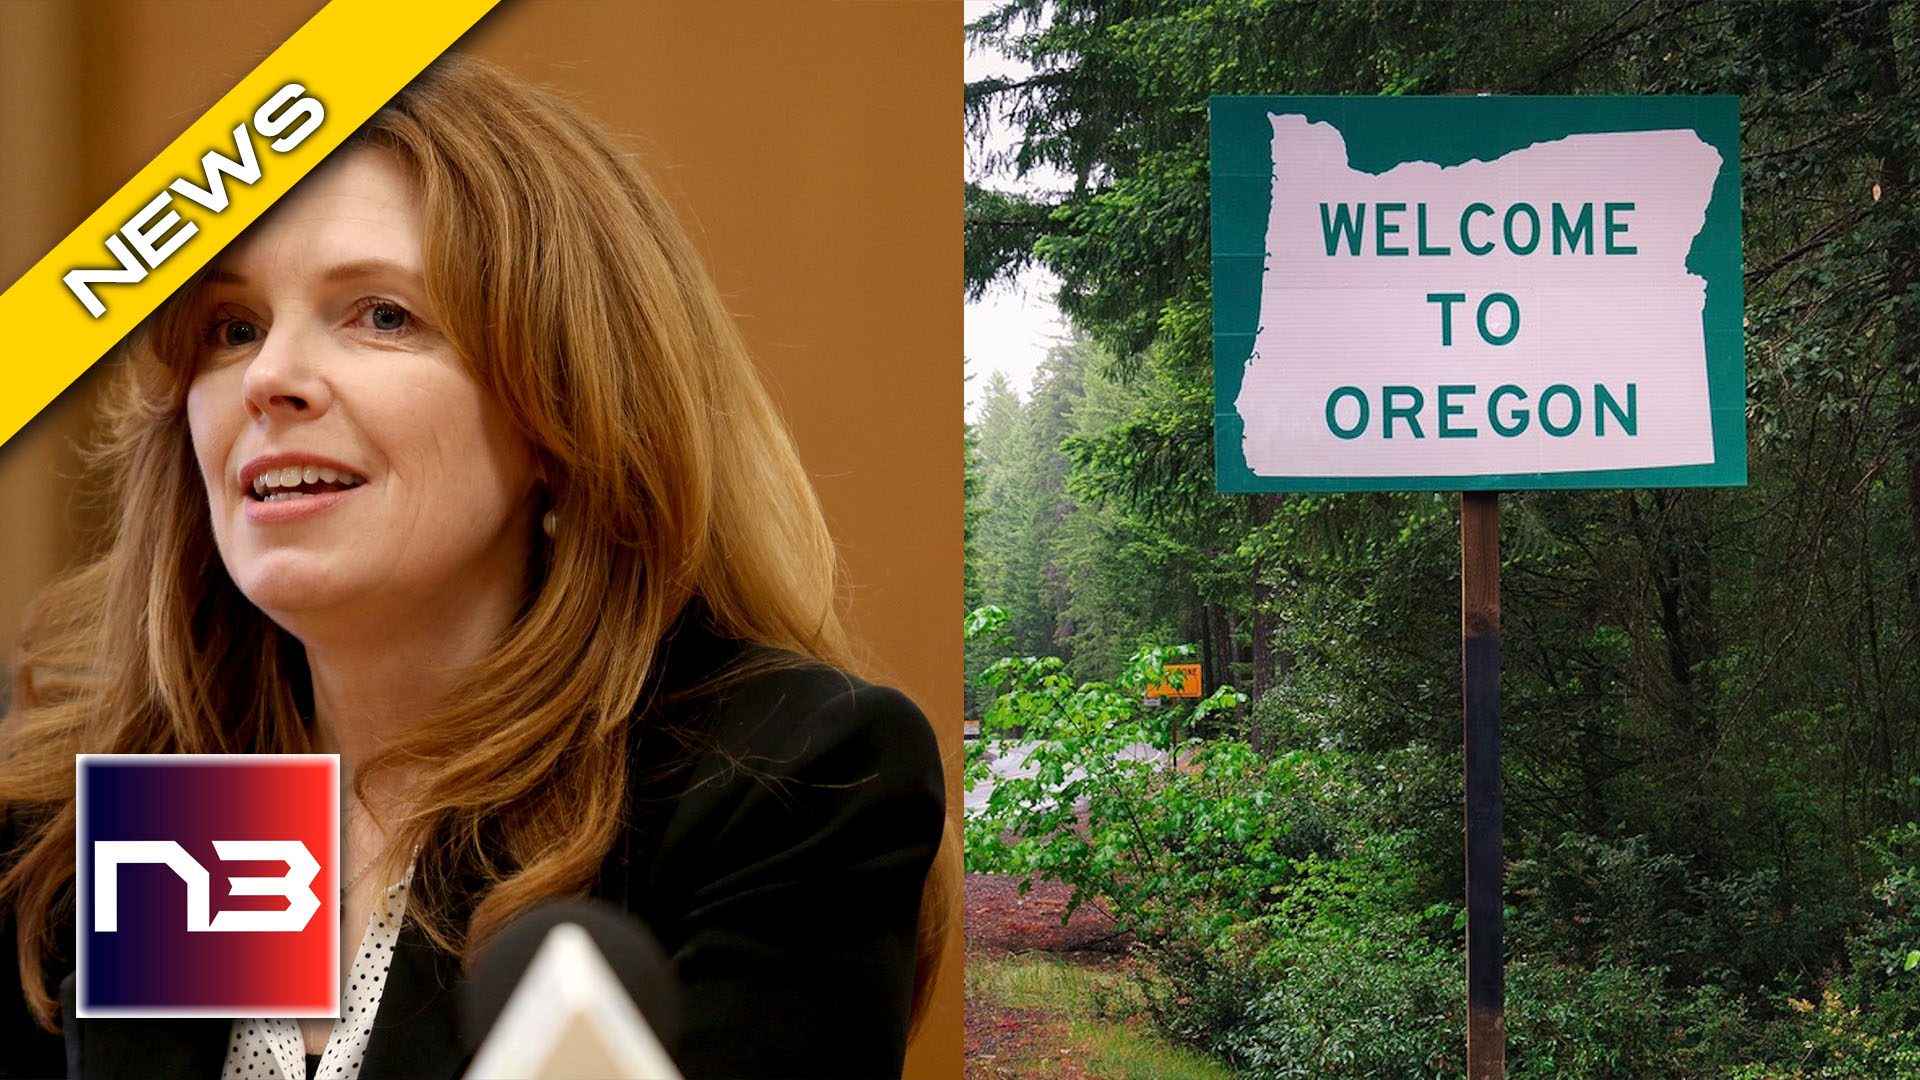 RED WAVE: Historic Shift Expected in Oregon - University Predicts A Democrat BLOODBATH